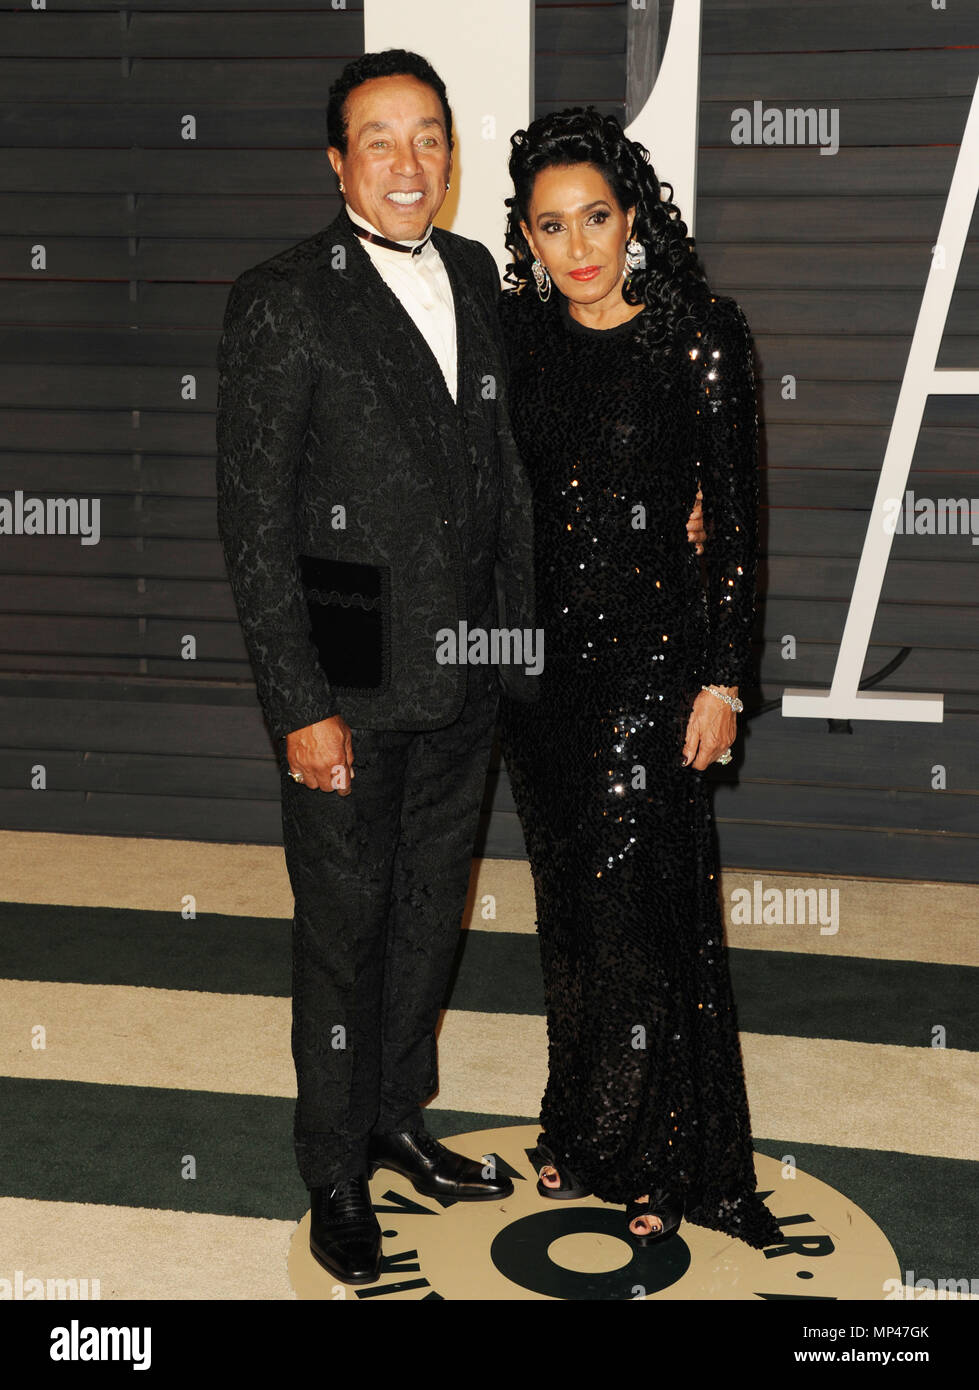 Frances Robinson, Smokey Robinson 409 at the 2015 Vanity Fair Oscars party at the Wallis Annenberg Center for the Performing Arts on February 22, 2015 in Beverly Hills, Frances Robinson, Smokey Robinson 409 ------------- Red Carpet Event, Vertical, USA, Film Industry, Celebrities,  Photography, Bestof, Arts Culture and Entertainment, Topix Celebrities fashion /  Vertical, Best of, Event in Hollywood Life - California,  Red Carpet and backstage, USA, Film Industry, Celebrities,  movie celebrities, TV celebrities, Music celebrities, Photography, Bestof, Arts Culture and Entertainment,  Topix, ve Stock Photo